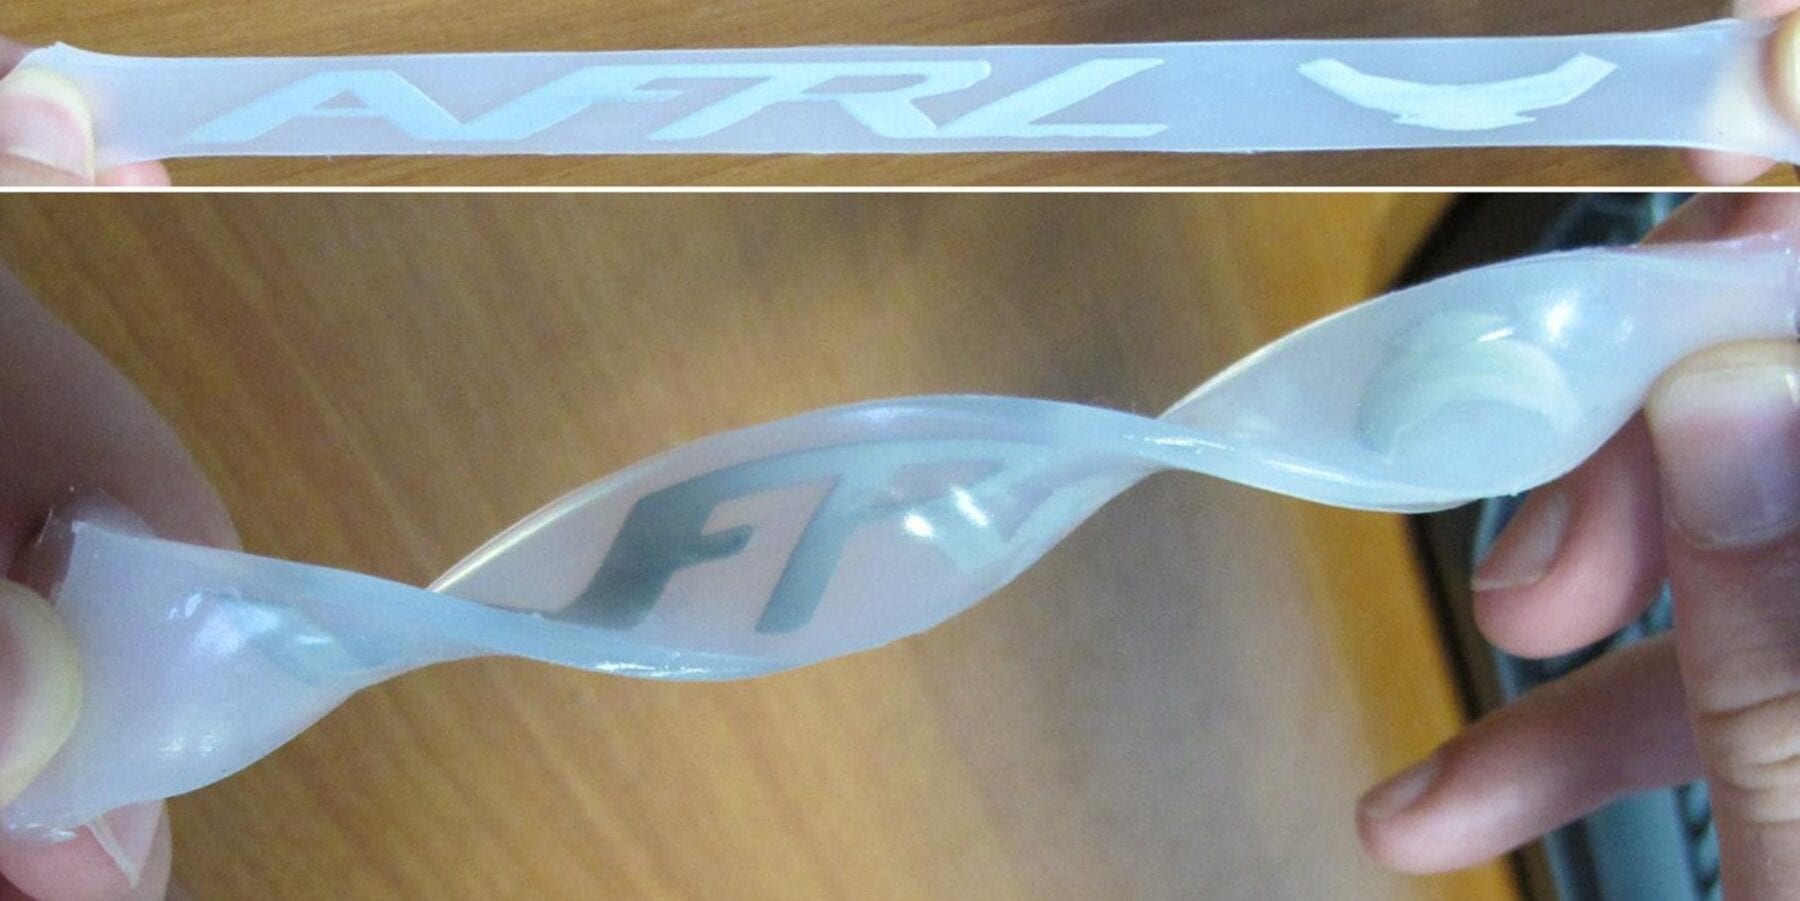 A thin ribbon of flexible electronics can monitor health, infrastructure